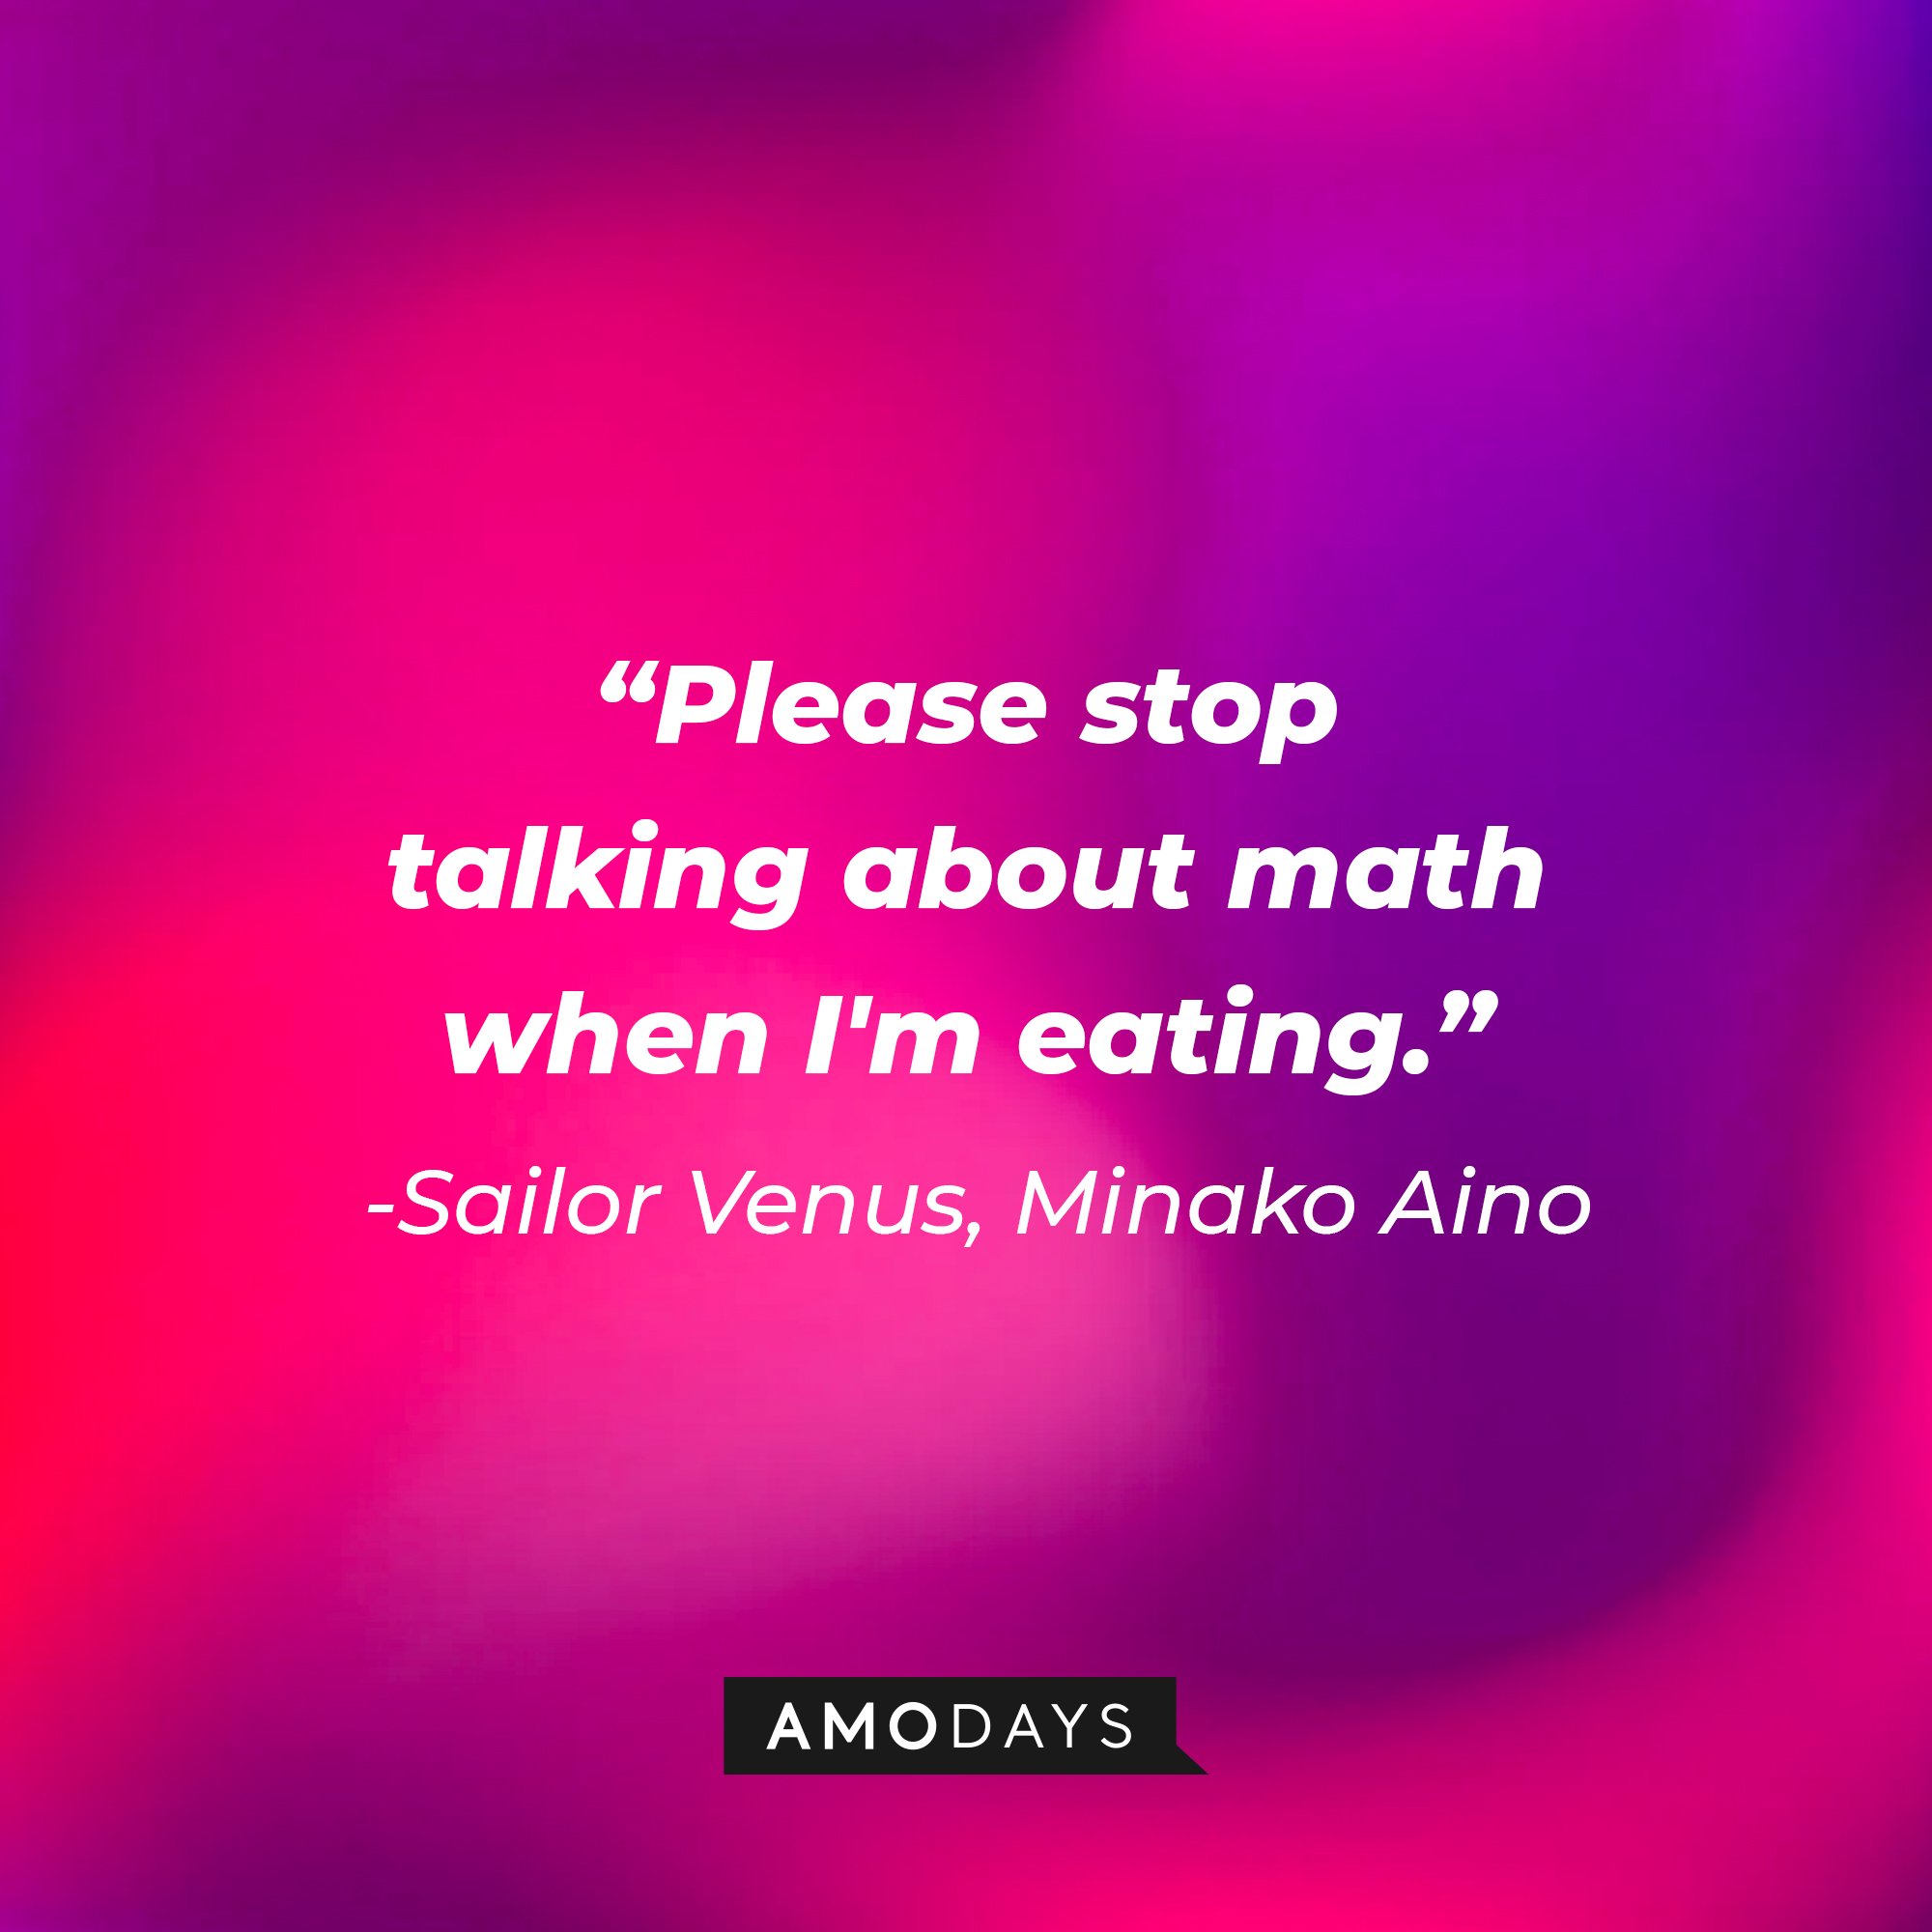  Sailor Mercury/Ami Mizuno’s quote: "Please stop talking about math when I'm eating." | Image: AmoDays